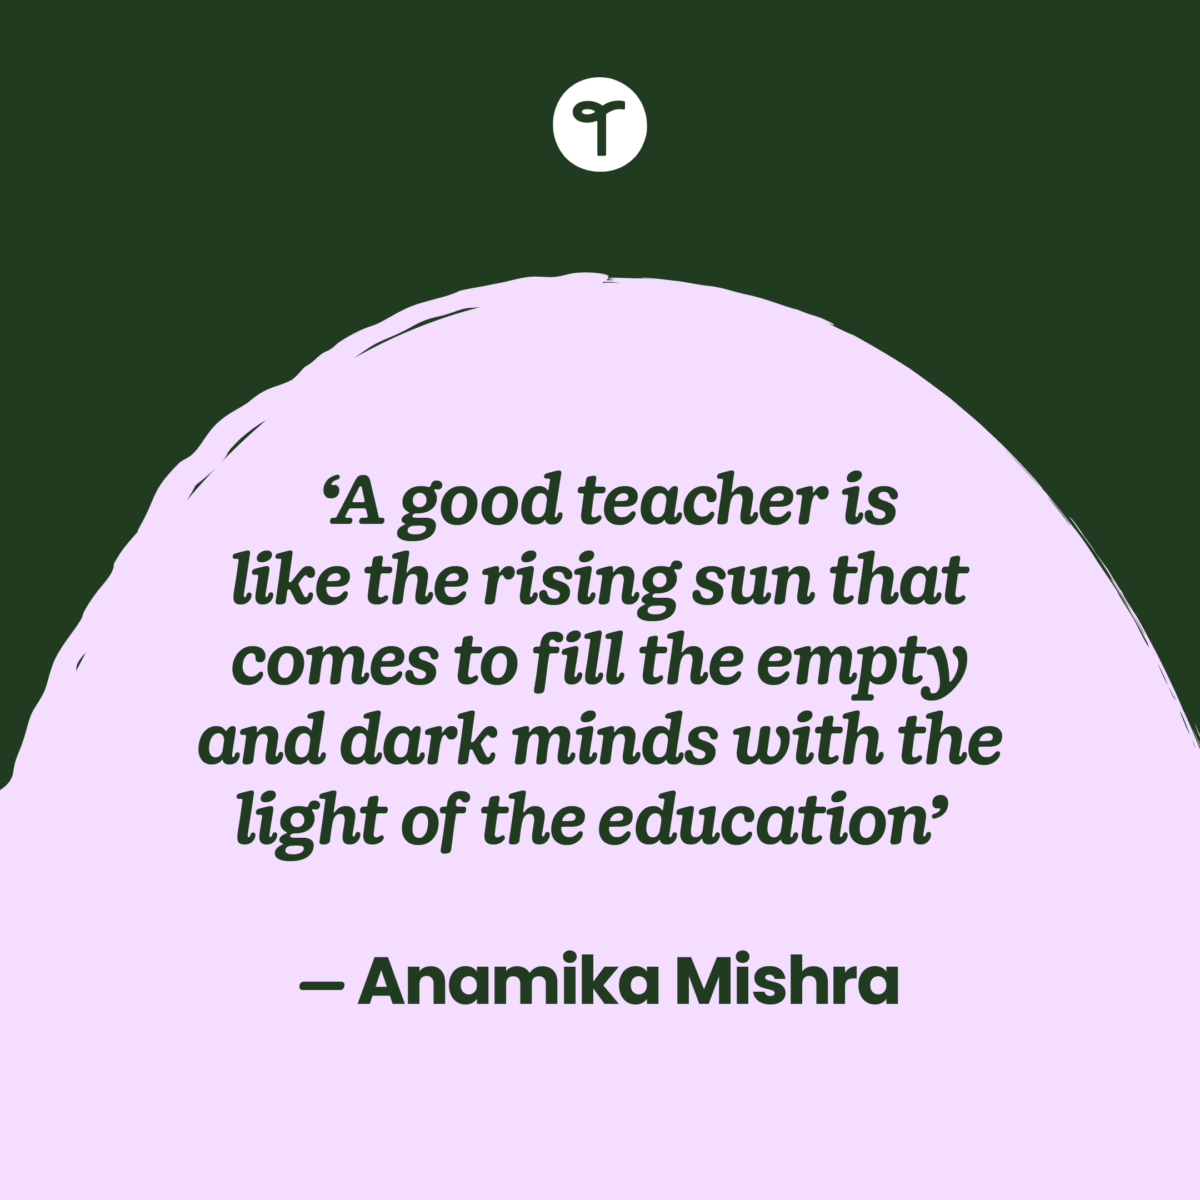 'A good teacher is like the rising sun that comes to fill the empty and dark minds with the light of the education' ― Anamika Mishra written on a purple half circle